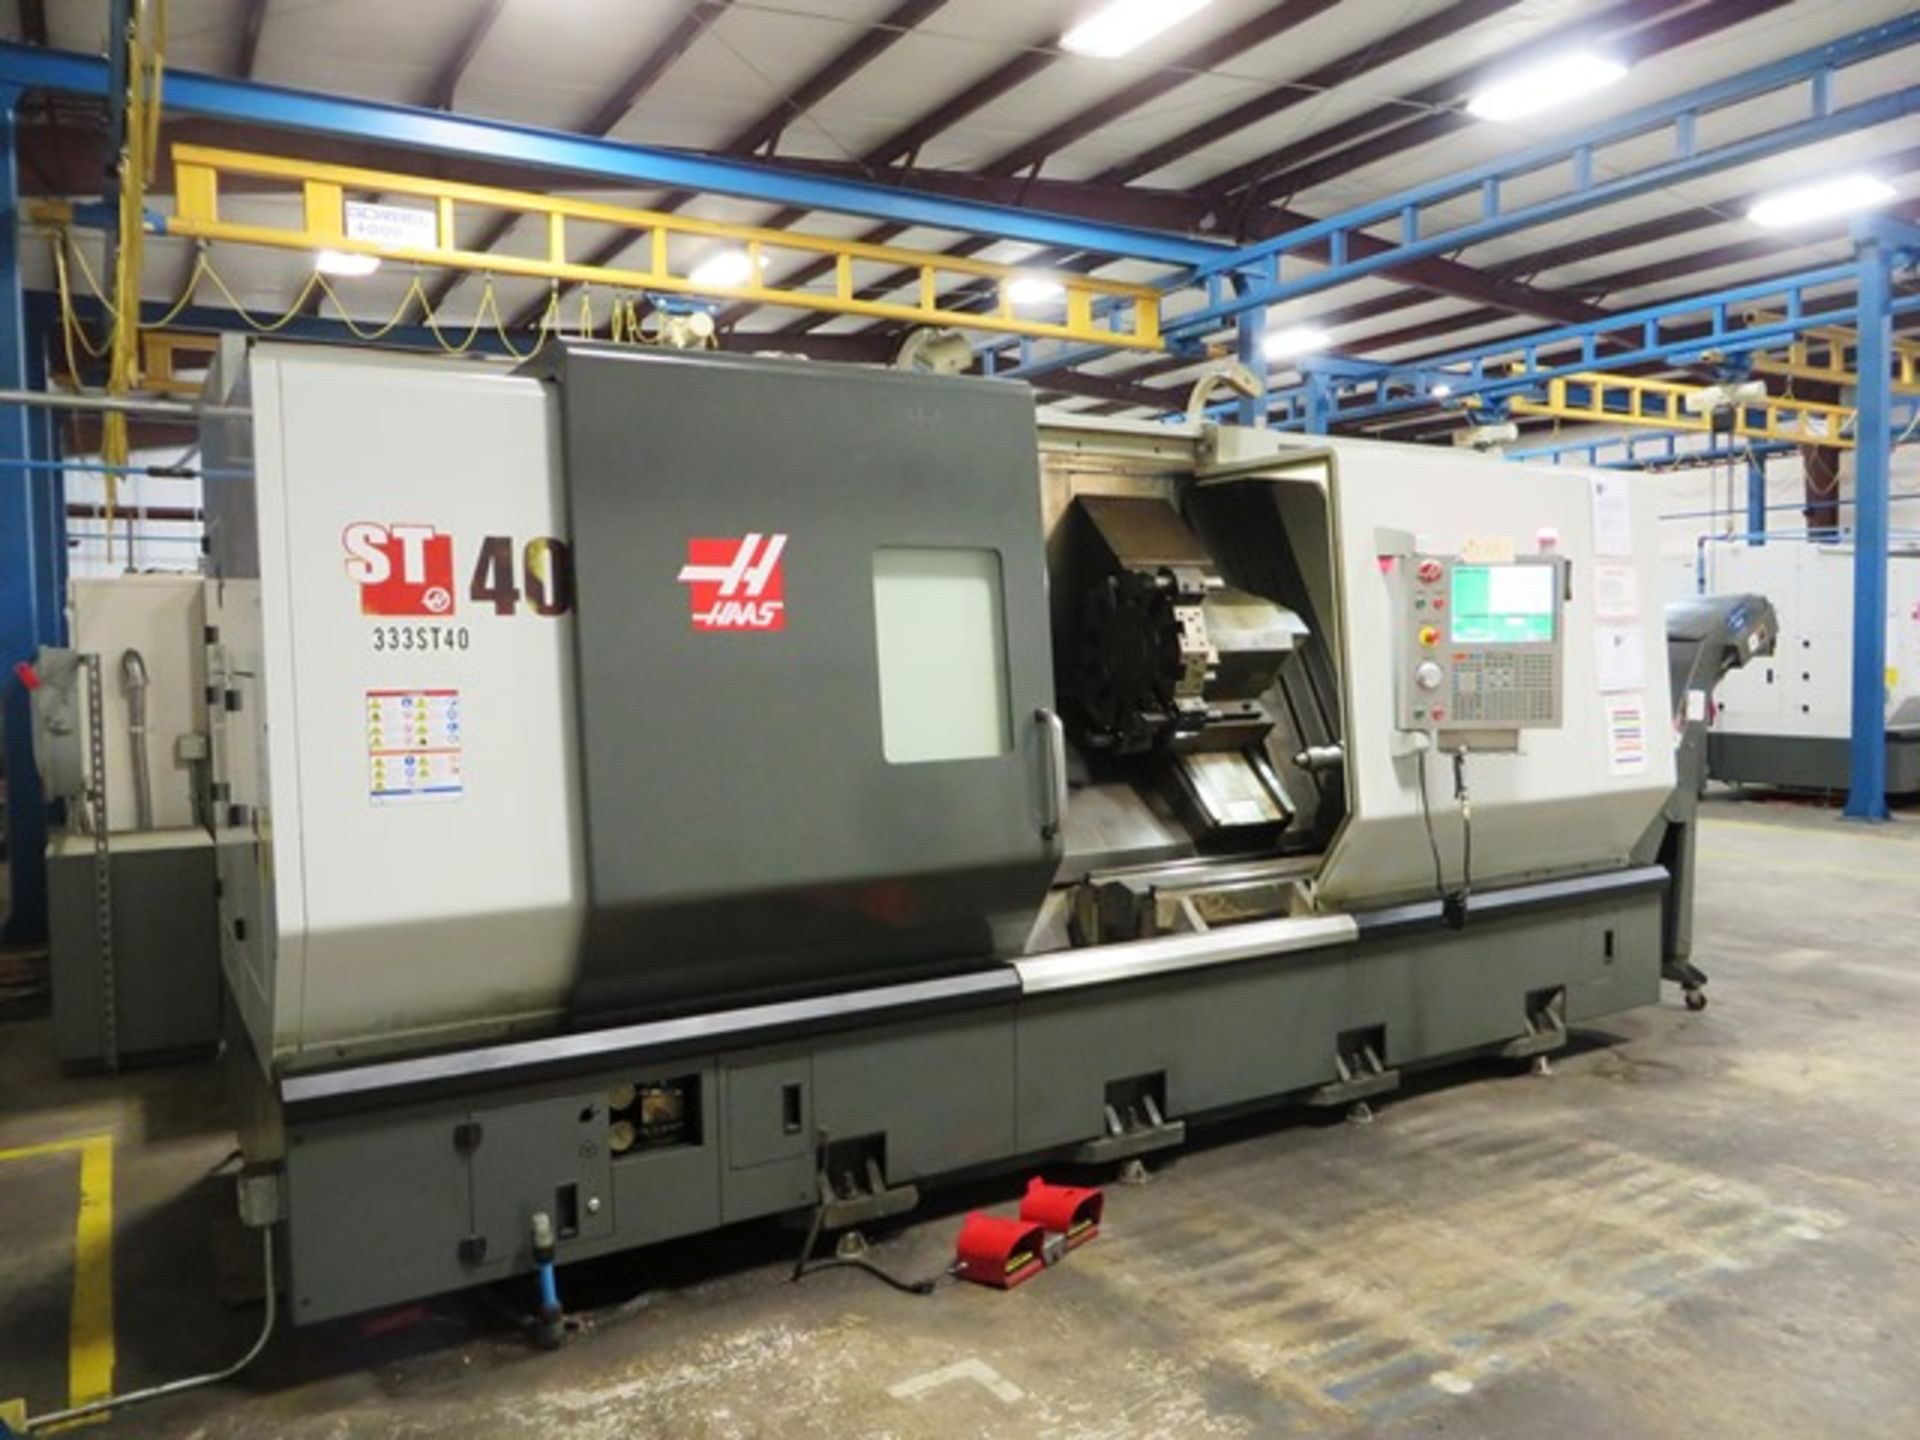 2013 Haas Model ST-40 CNC Turning Center - Image 3 of 6